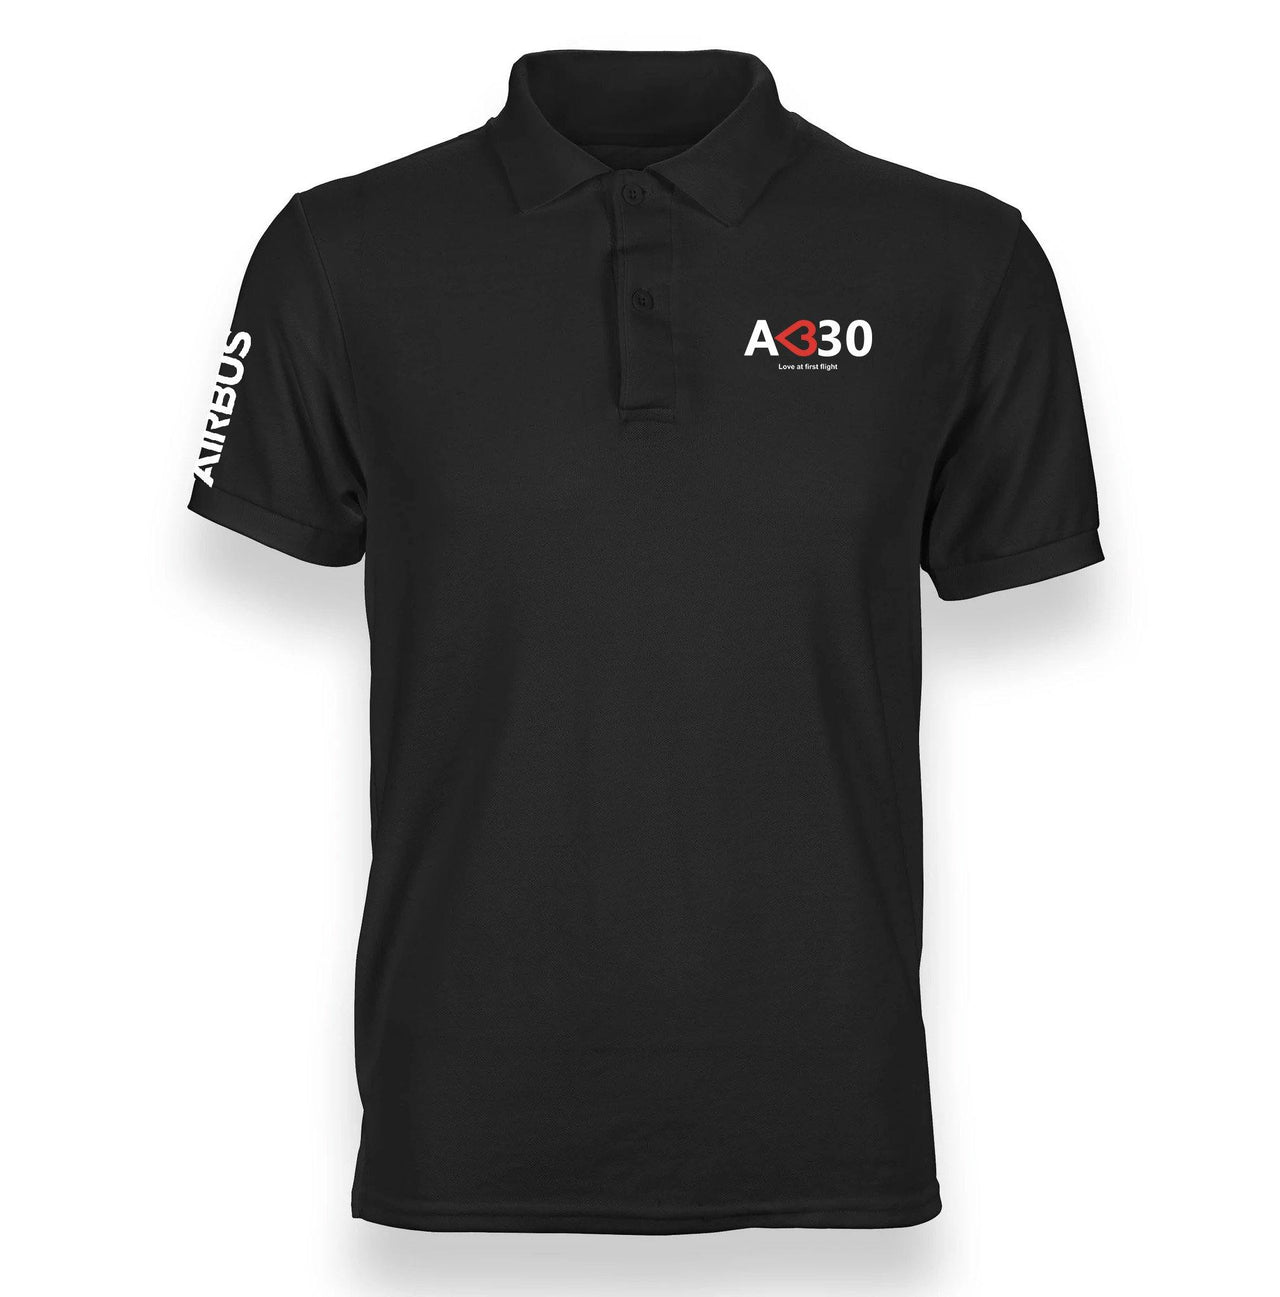 AIRBUS A330 LOVE AT FIRST FLIGHT DESIGNED POLO SHIRT THE AV8R